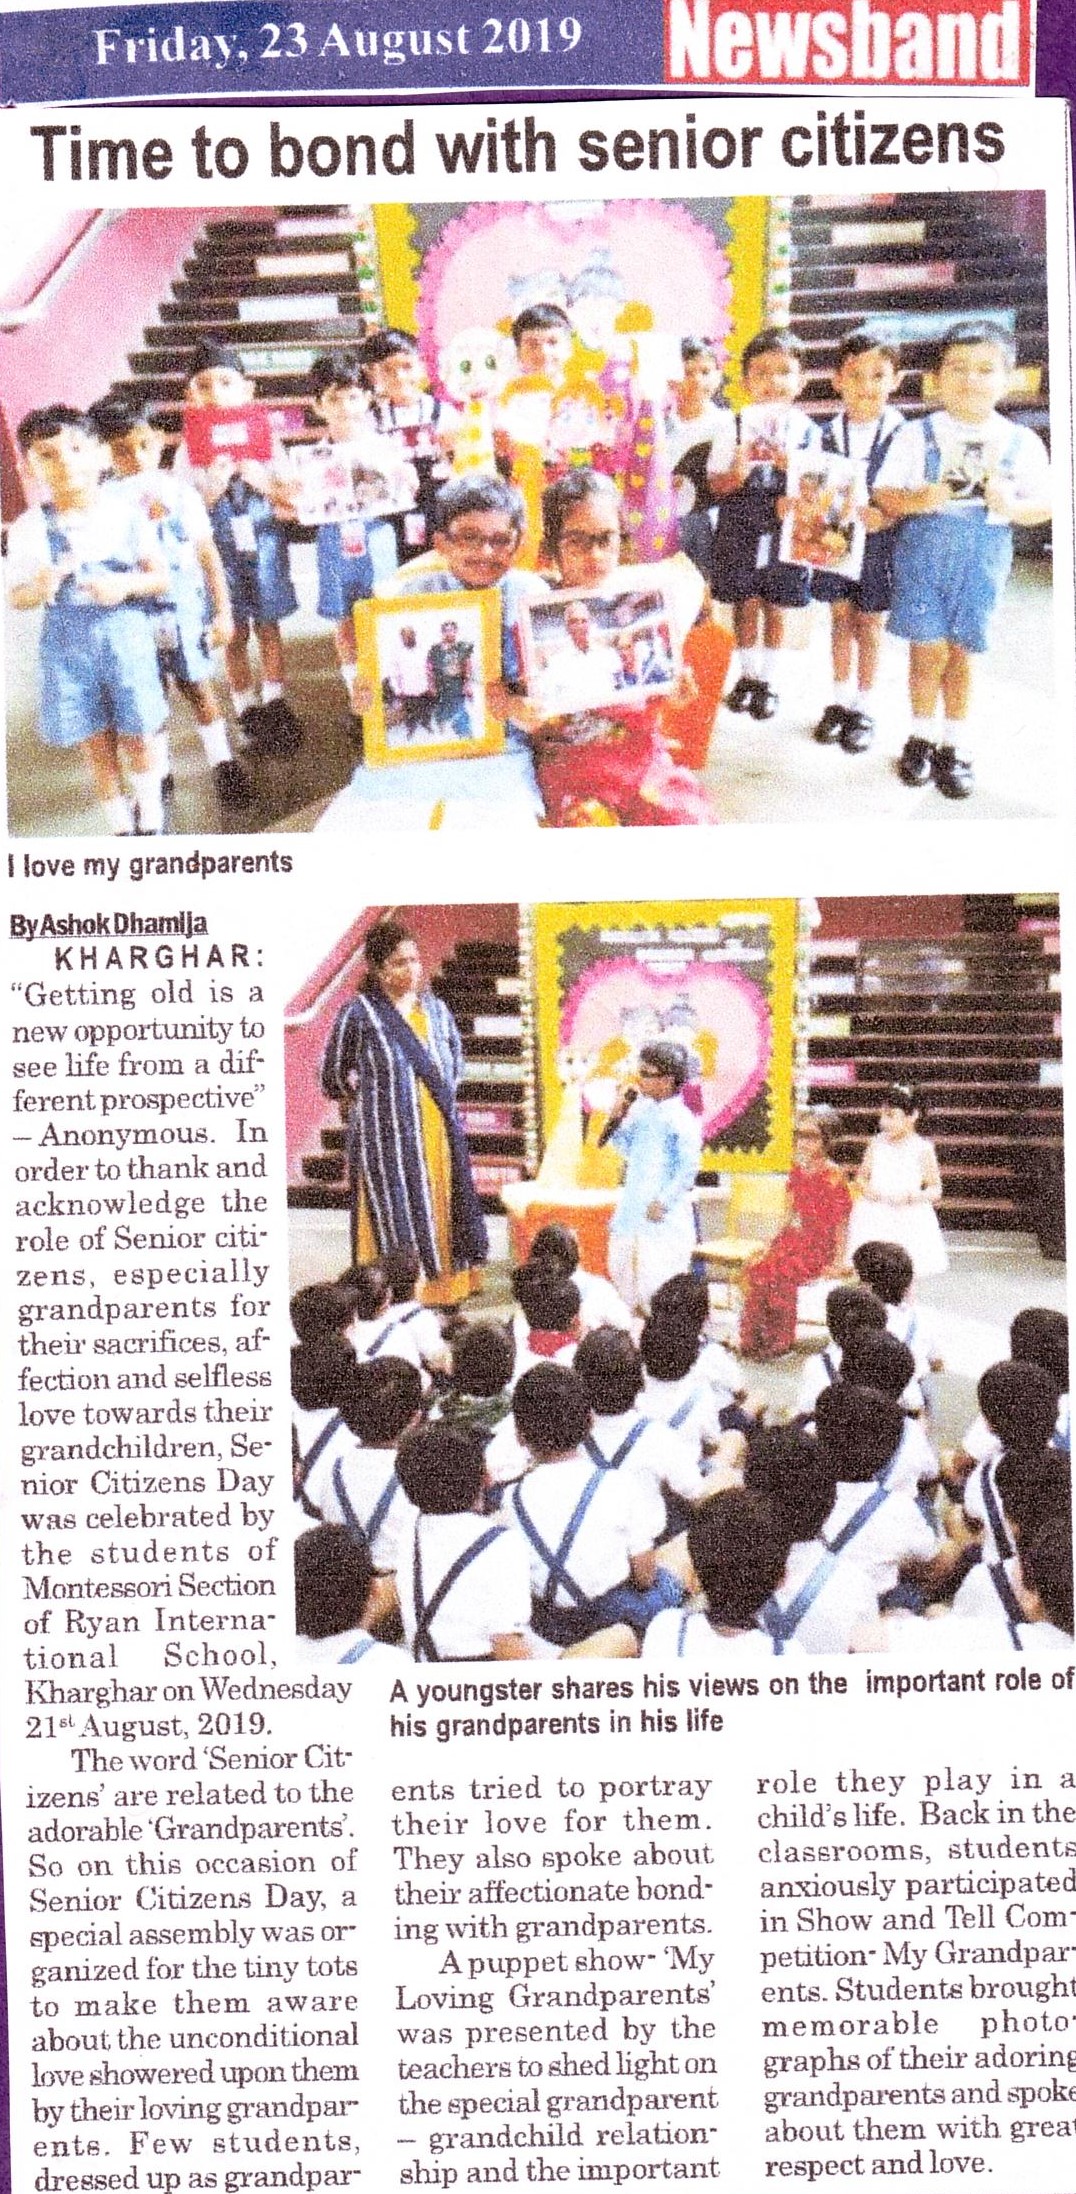 Time to bond with senior citizens was mentioned in News band - Ryan International School, Kharghar - Ryan Group